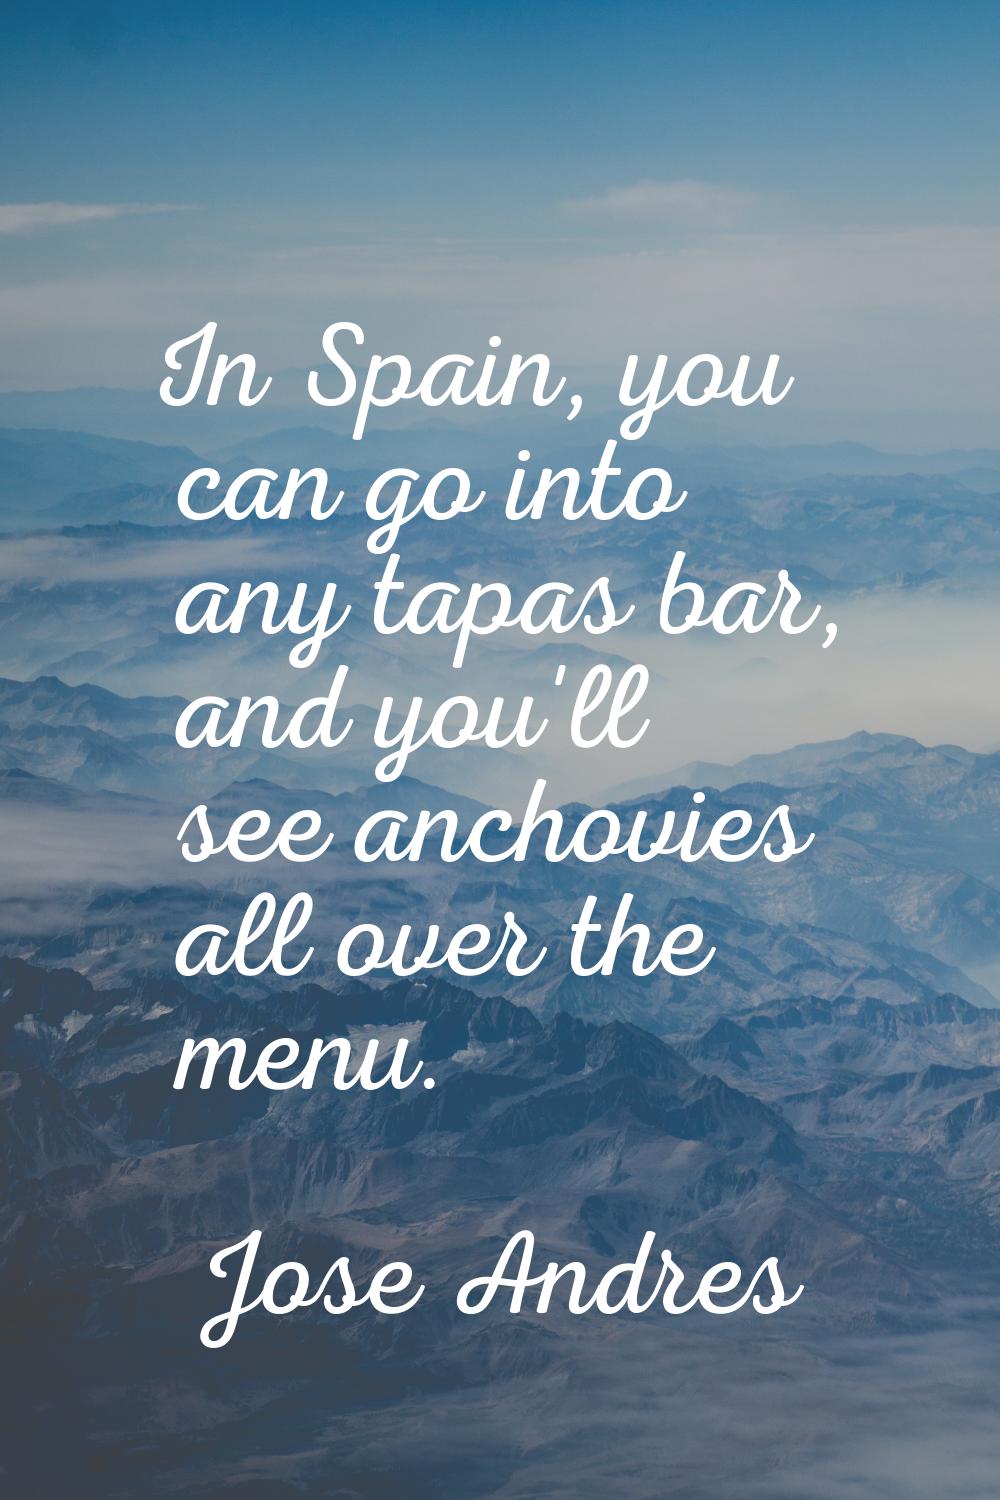 In Spain, you can go into any tapas bar, and you'll see anchovies all over the menu.